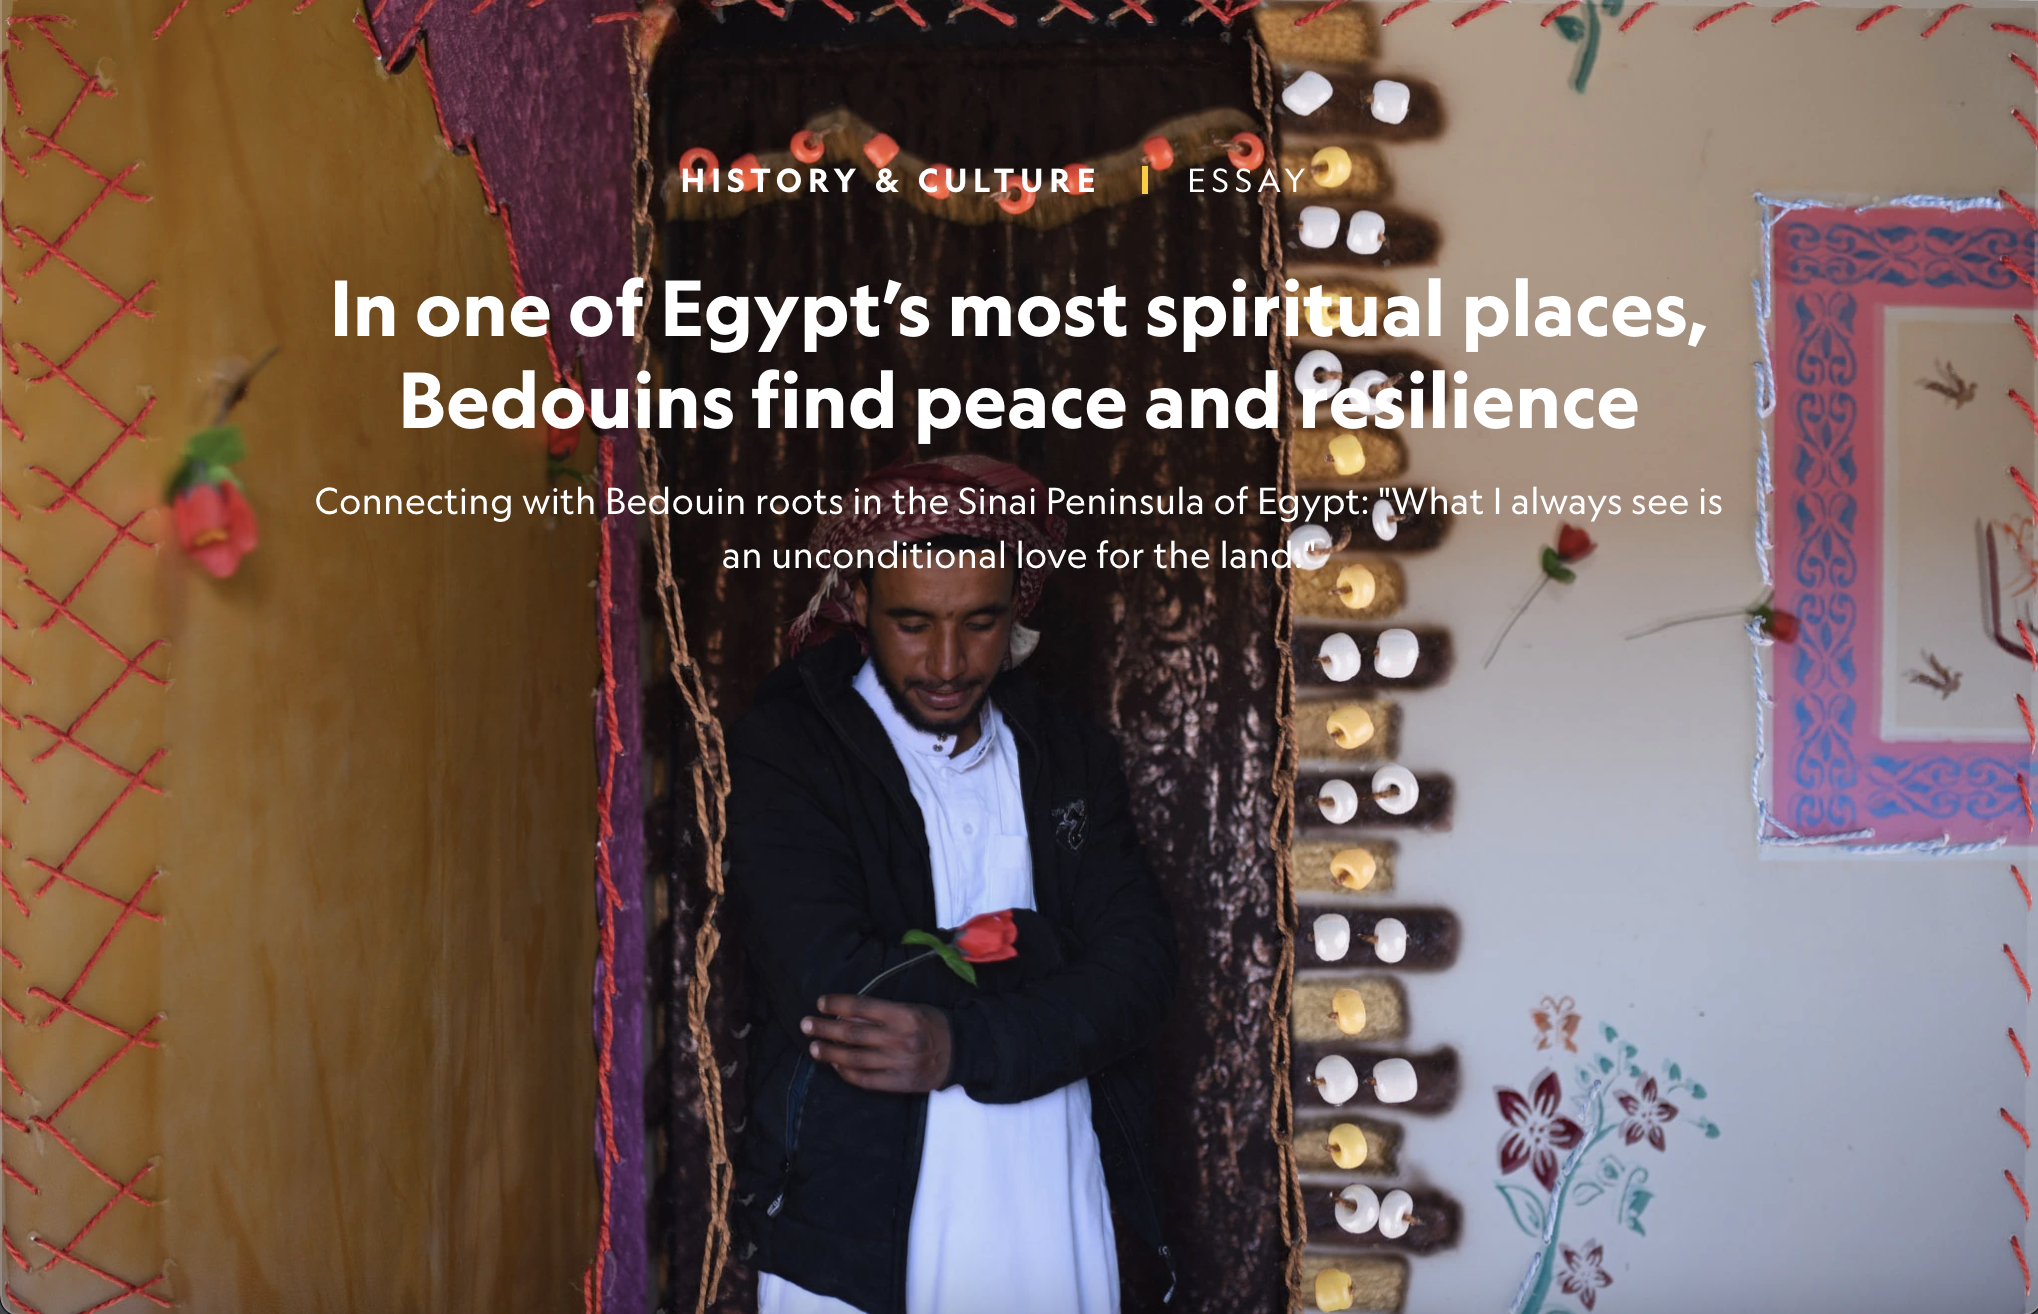 On National Geographic: In one of Egypt's most spiritual places, Bedouins find peace and resilience - 